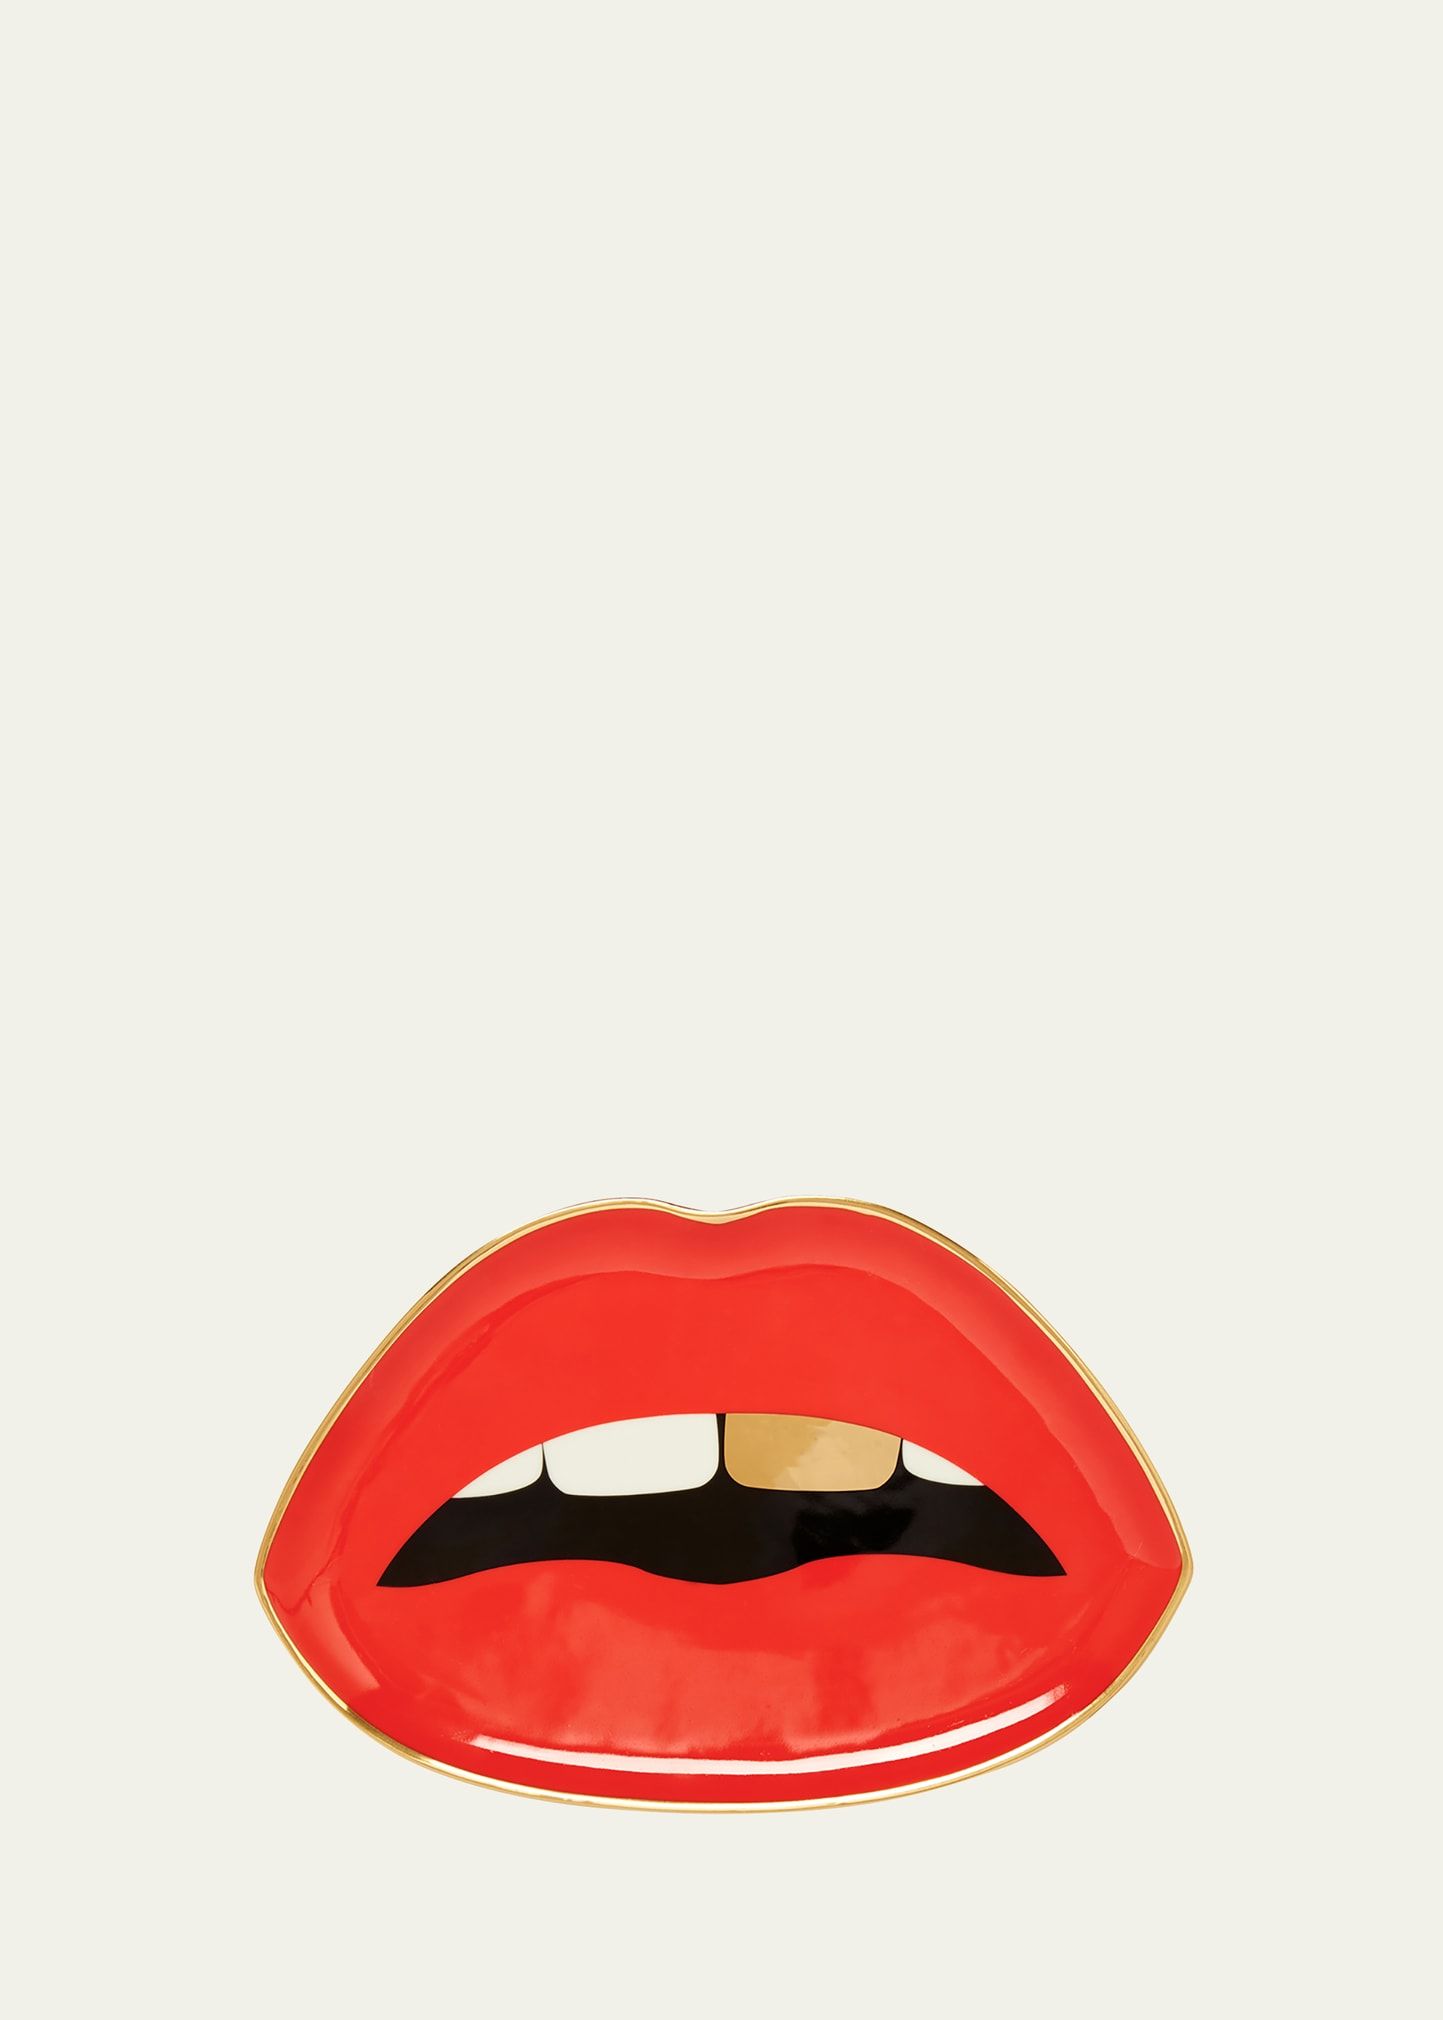 Red lips illustration on a white background - Lips